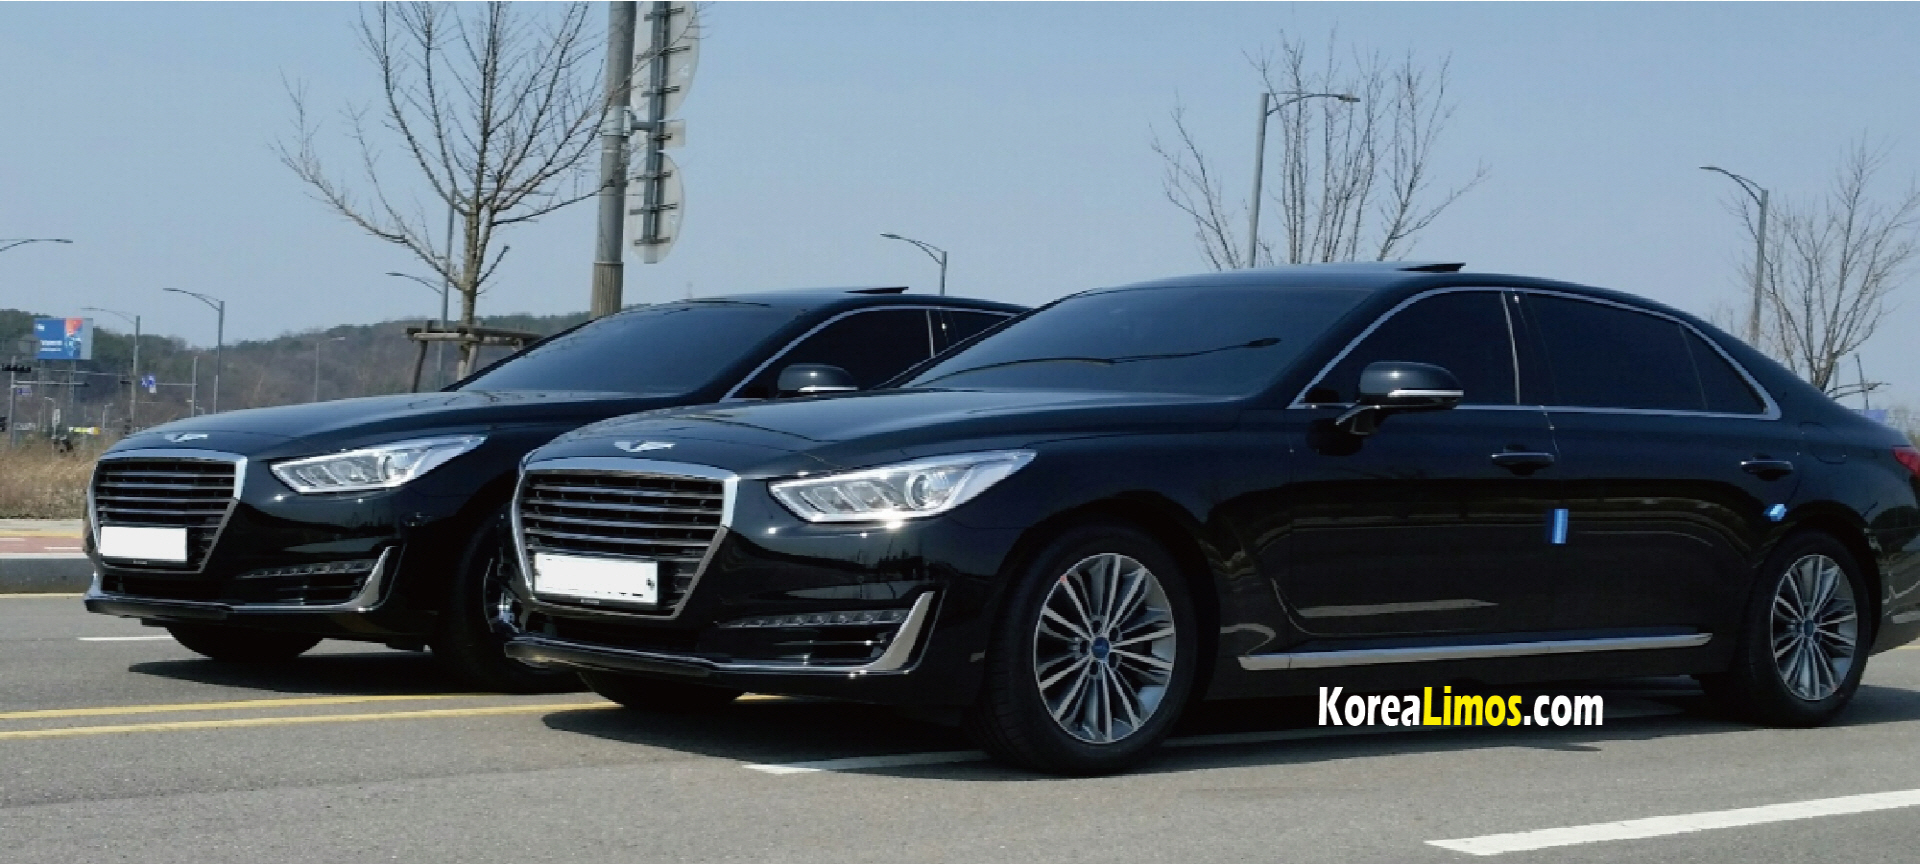 korea airport car service with driver